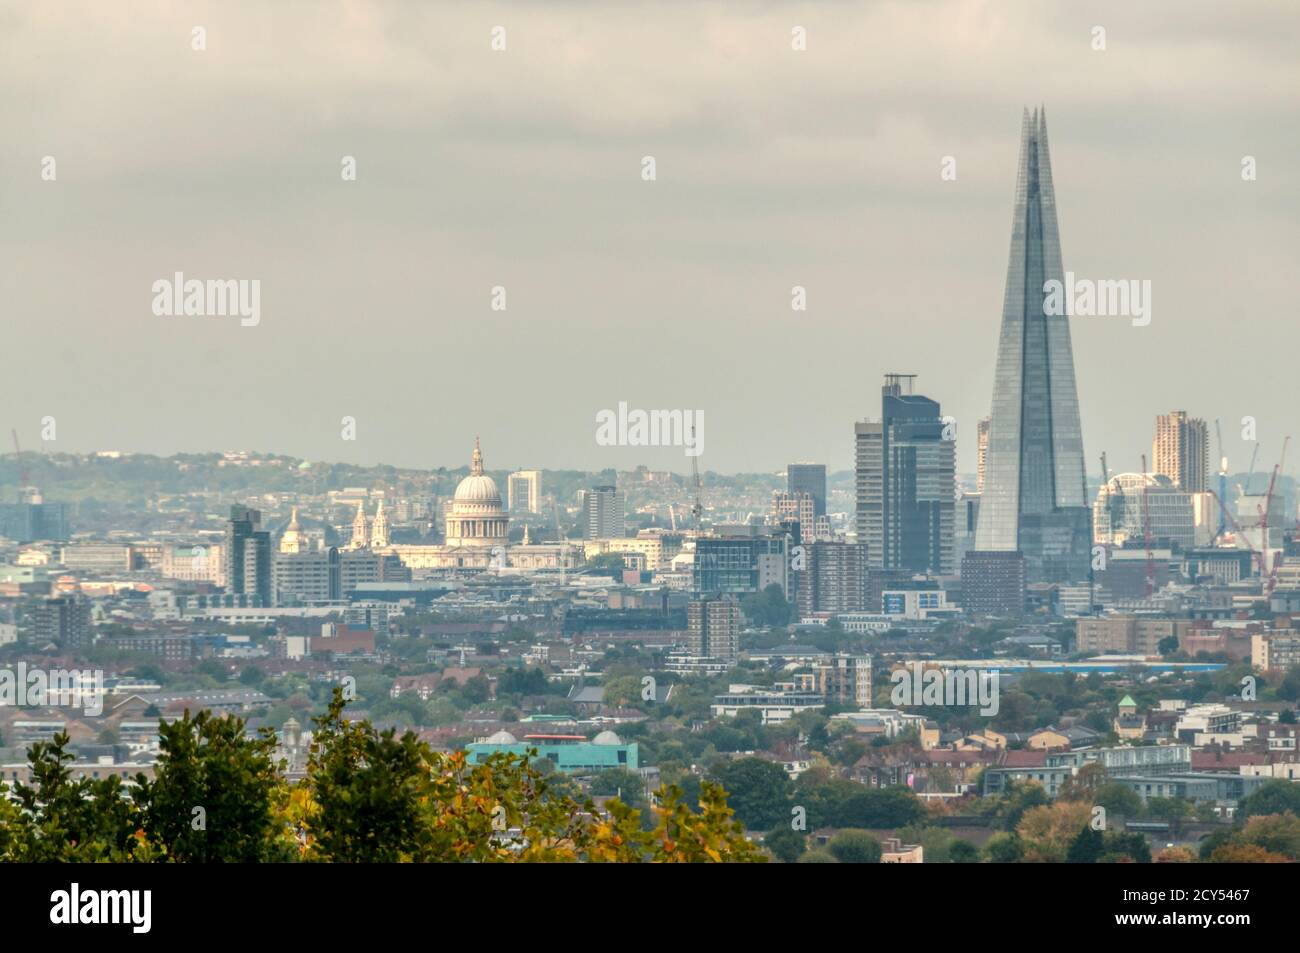 Central London skyline 2015 seen from One Tree hill in South London. Stock Photo